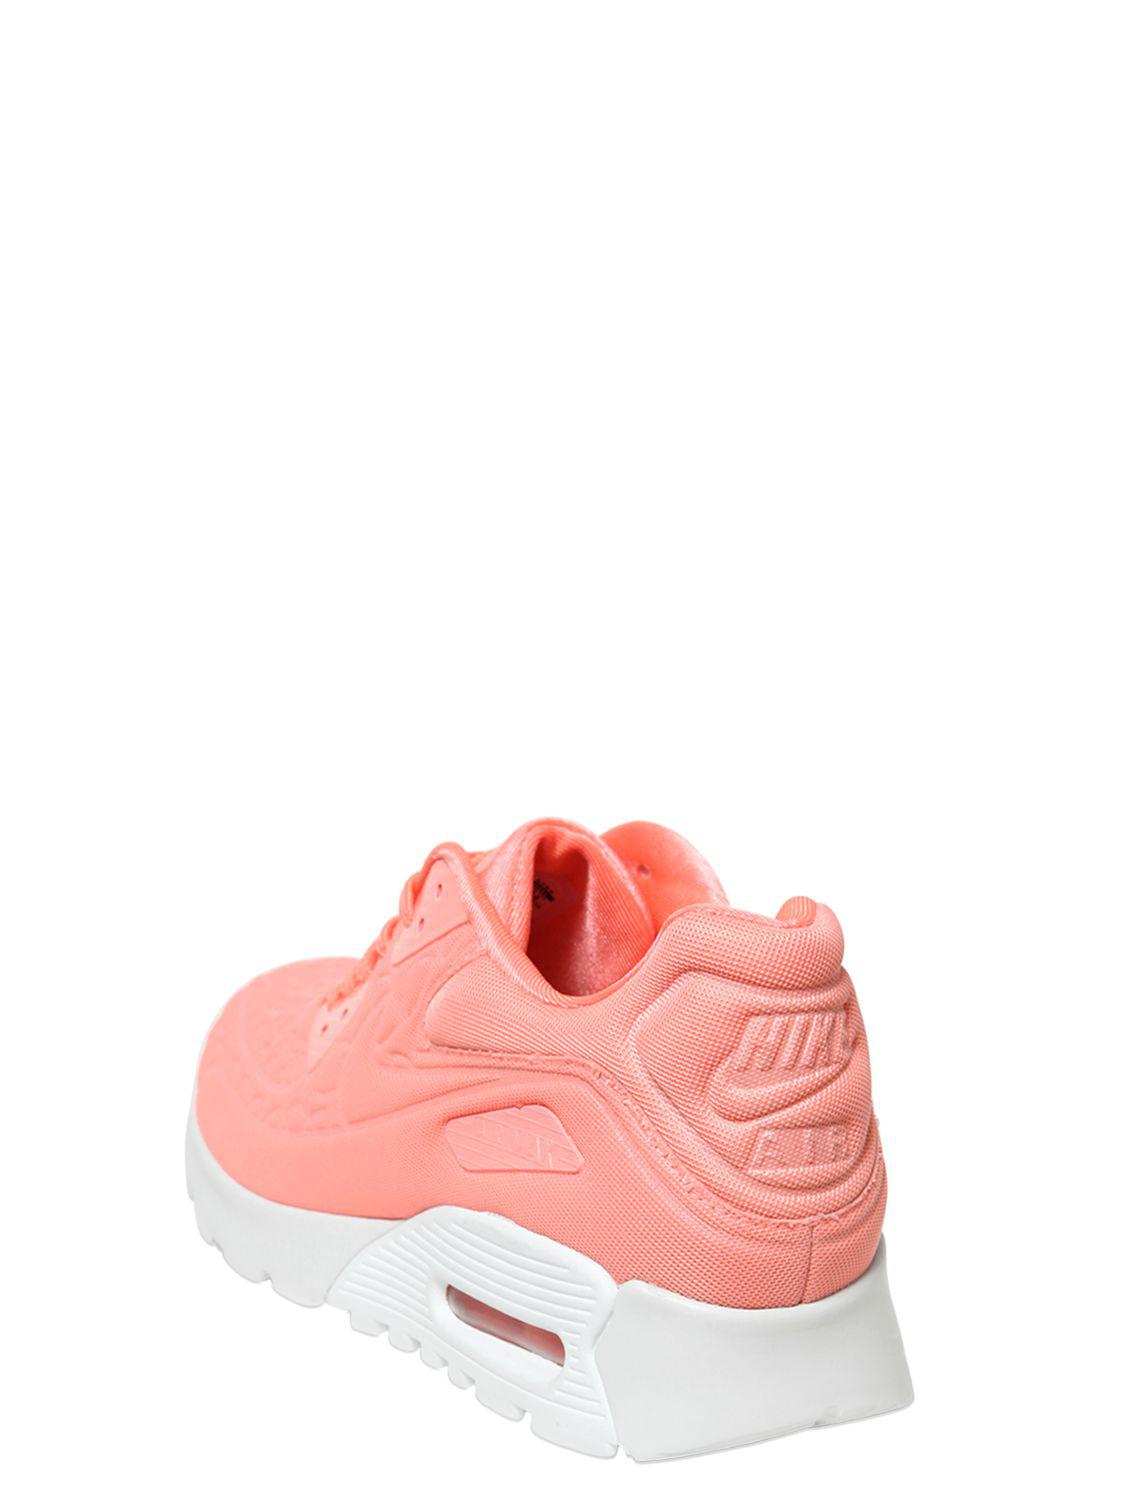 Nike Leather Air Max 90 Ultra Plush in Salmon Pink (Pink) - Lyst